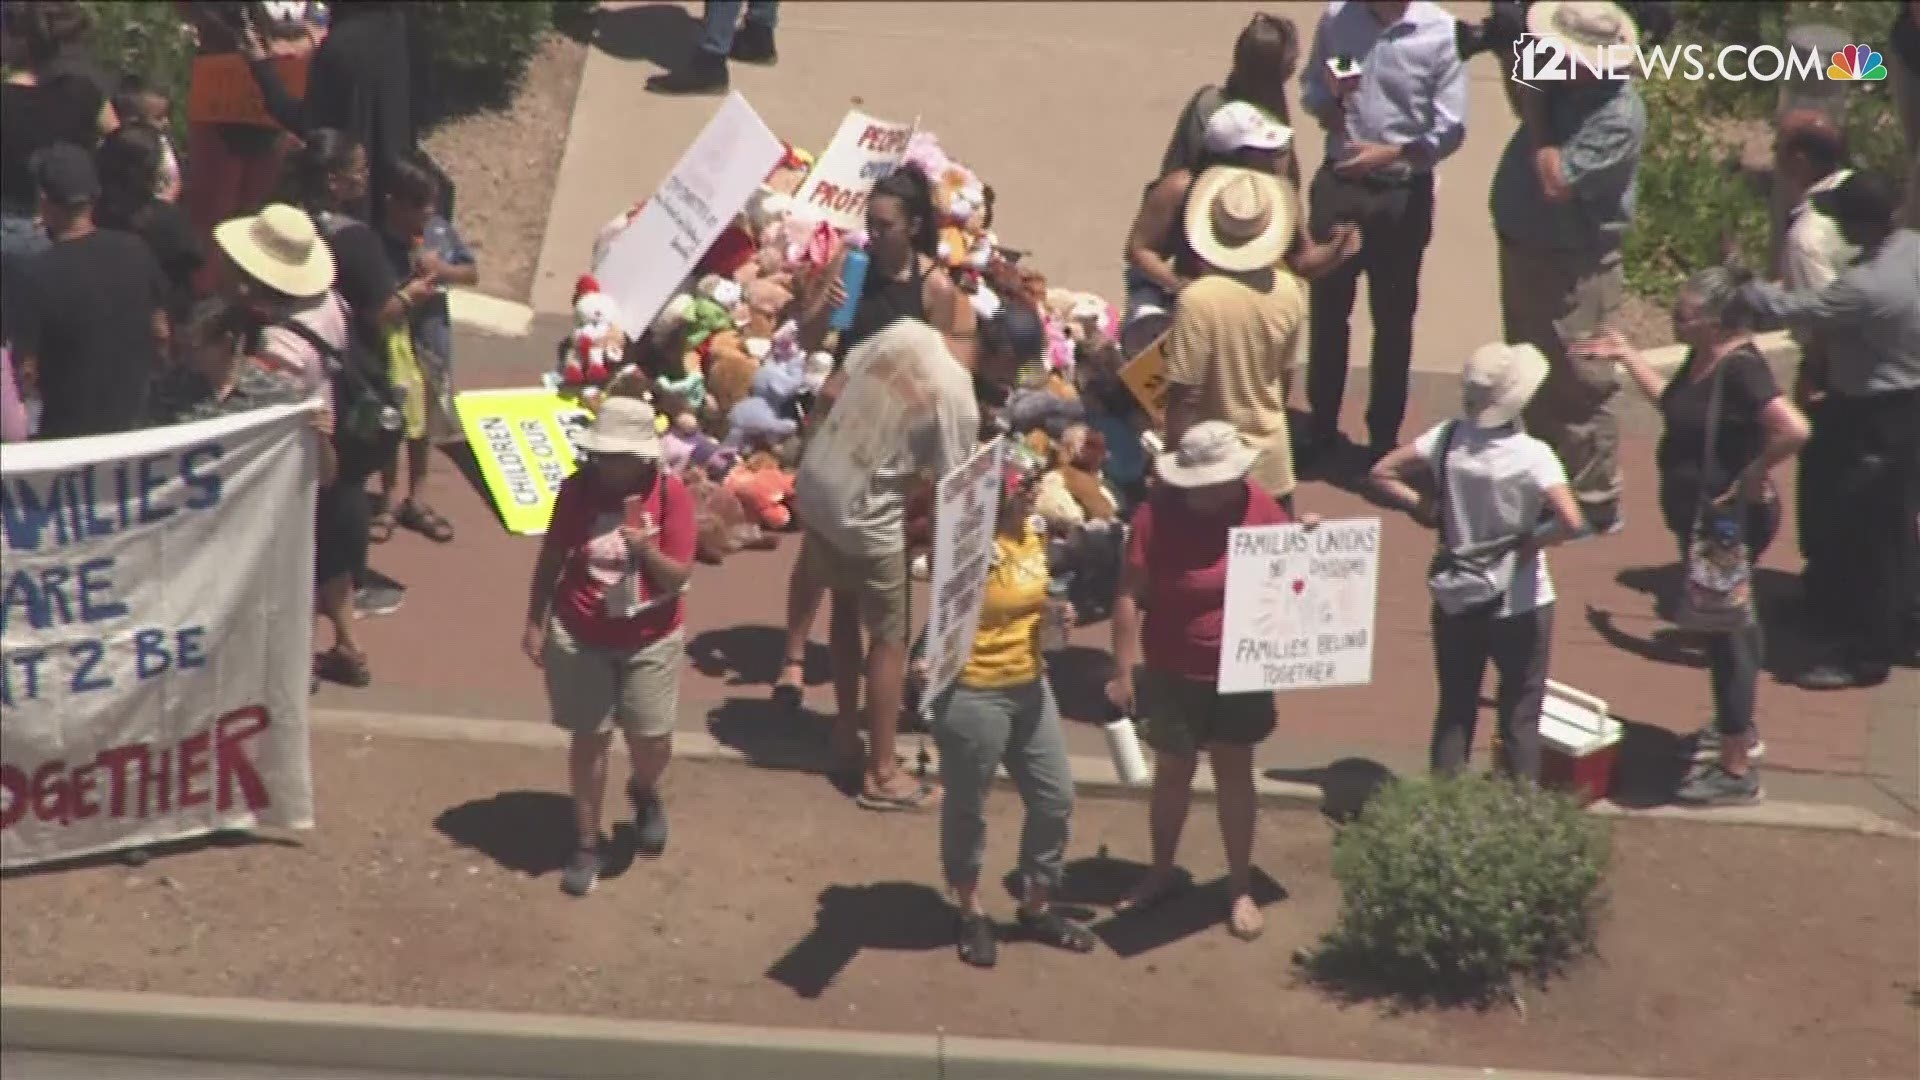 A group protesting the separation of children from their parents at the border have gathered outside Senator McCain's office in Phoenix.